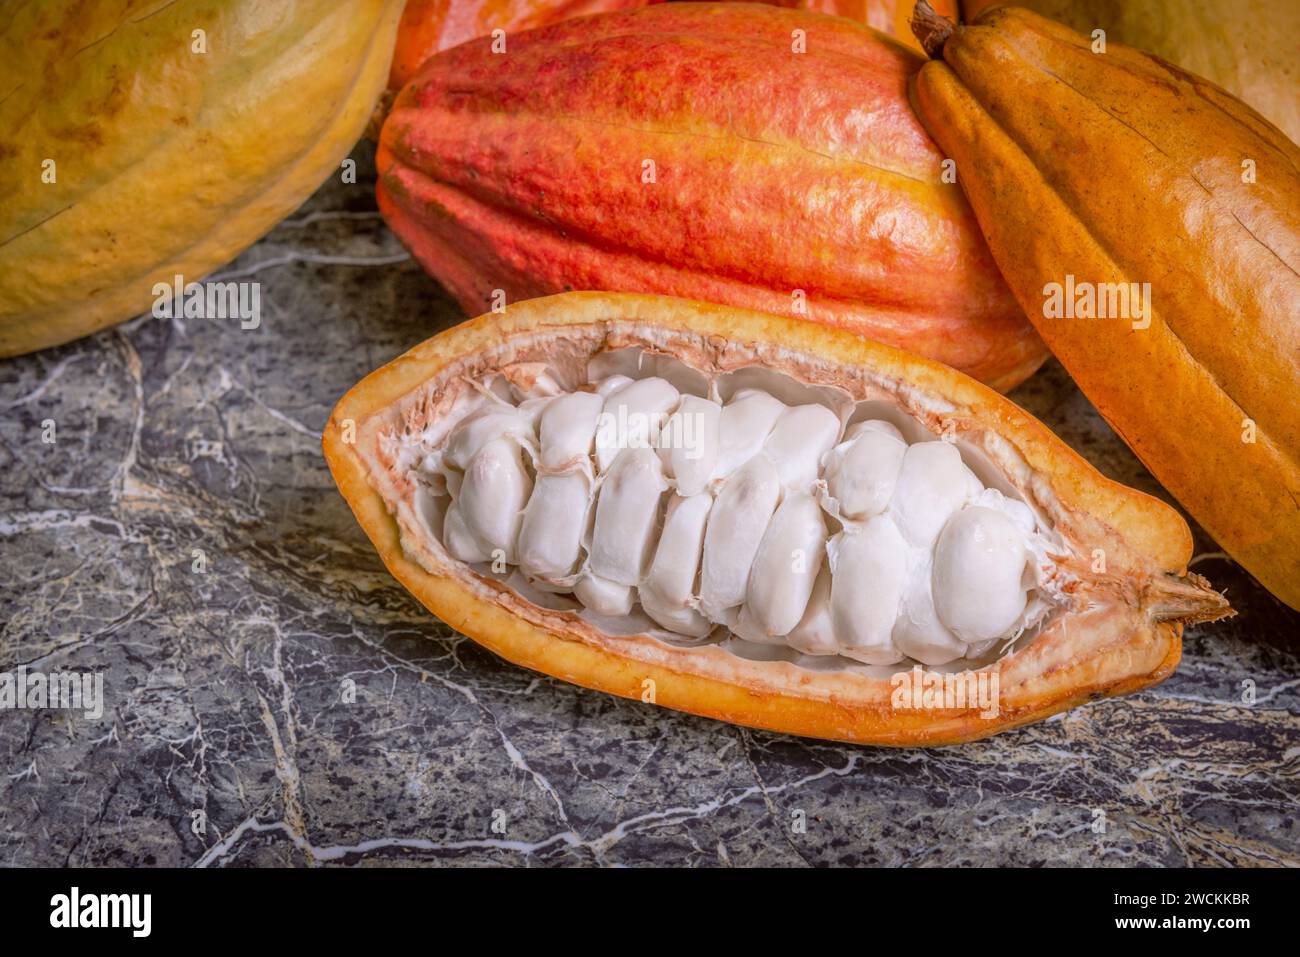 Cocoa pods still life close up whole organic marble top raw fruit Stock Photo